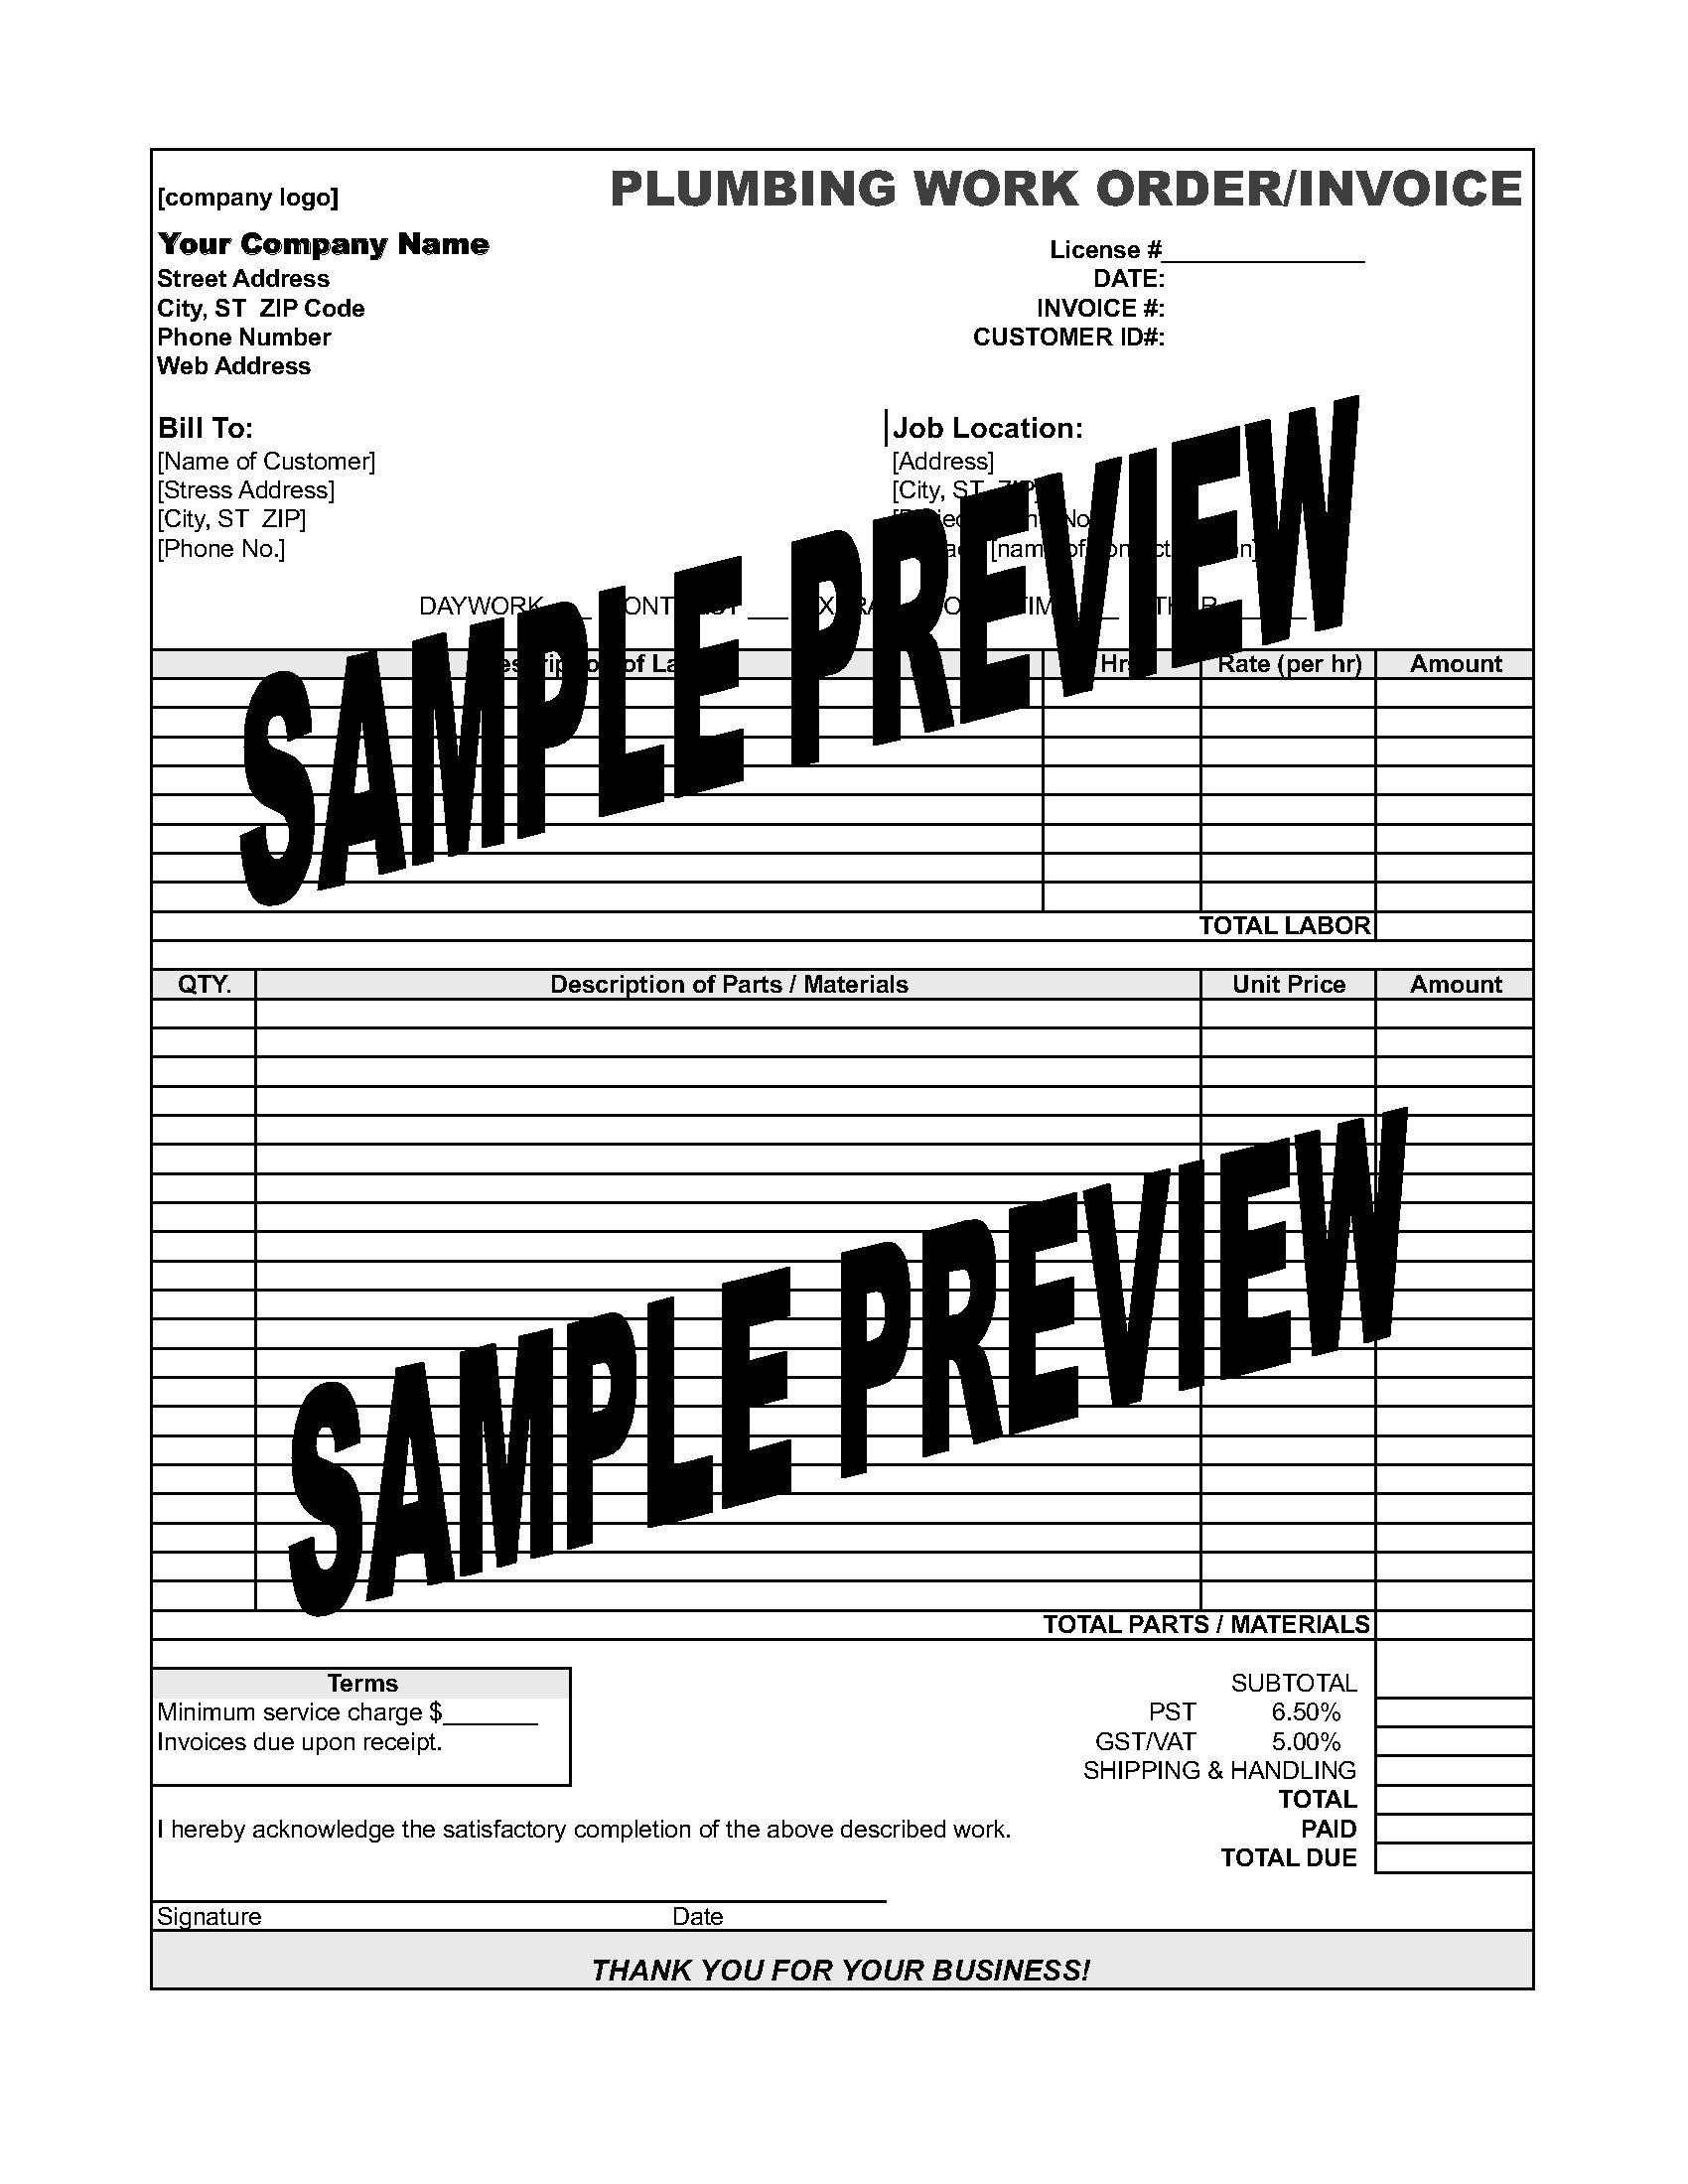 Plumbing Work Order / Invoice Legal Forms and Business Templates